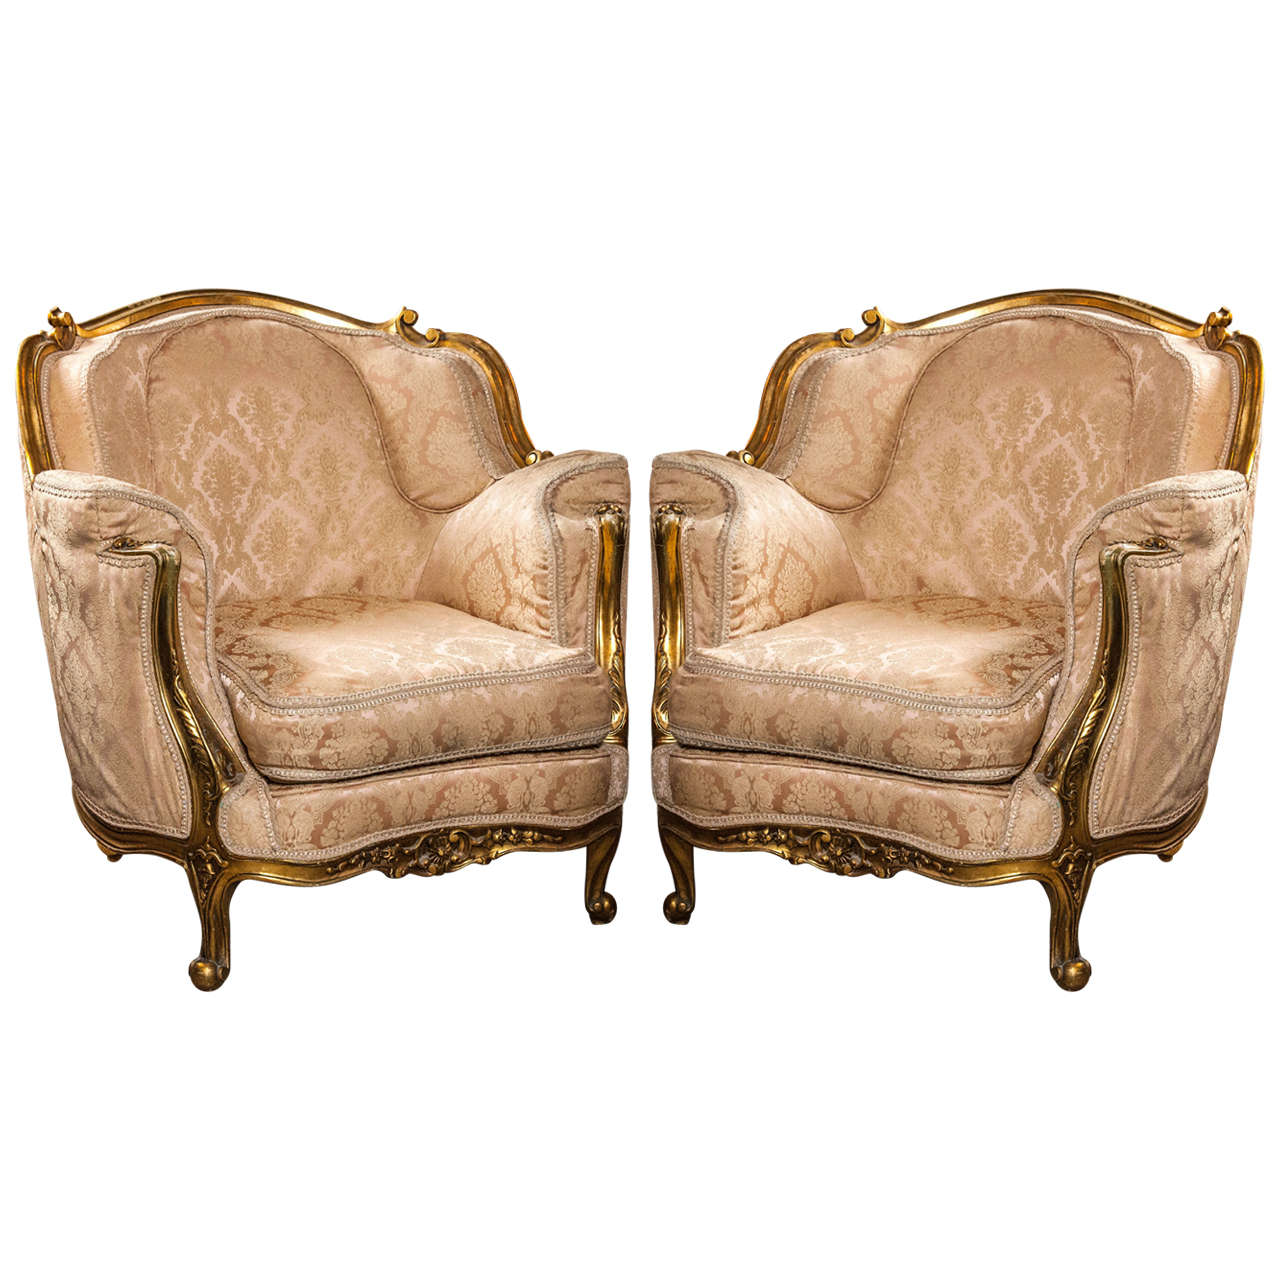 Pair of Louis XV Style Giltwood Bergere Chairs